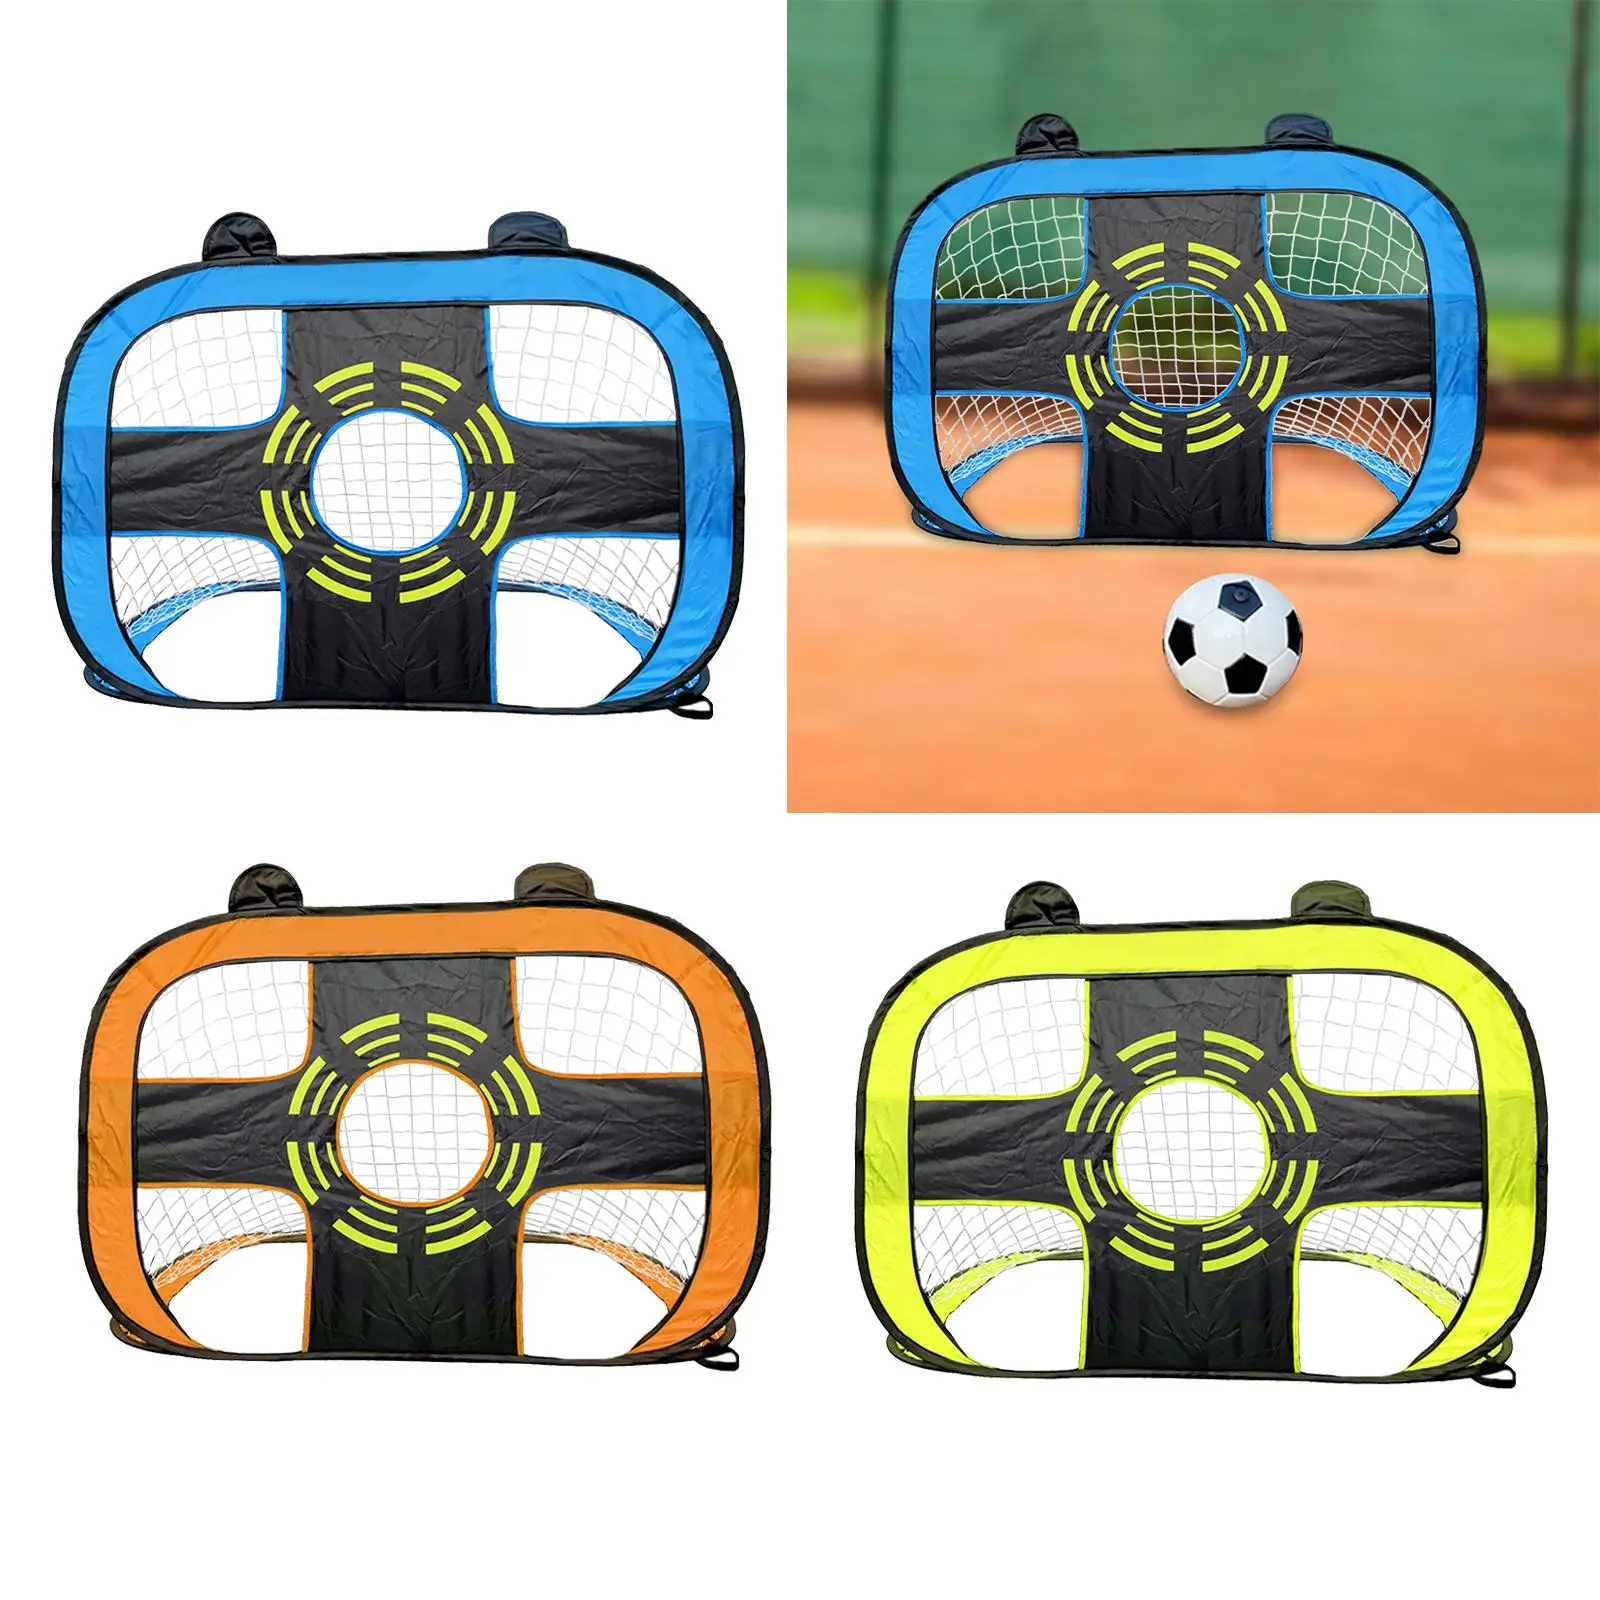 Kids Soccer Goal Pop up Foldable Children Football Toys Gift Lawn Activities Kick Trainer Easy Assembly for Kids Games Backyard